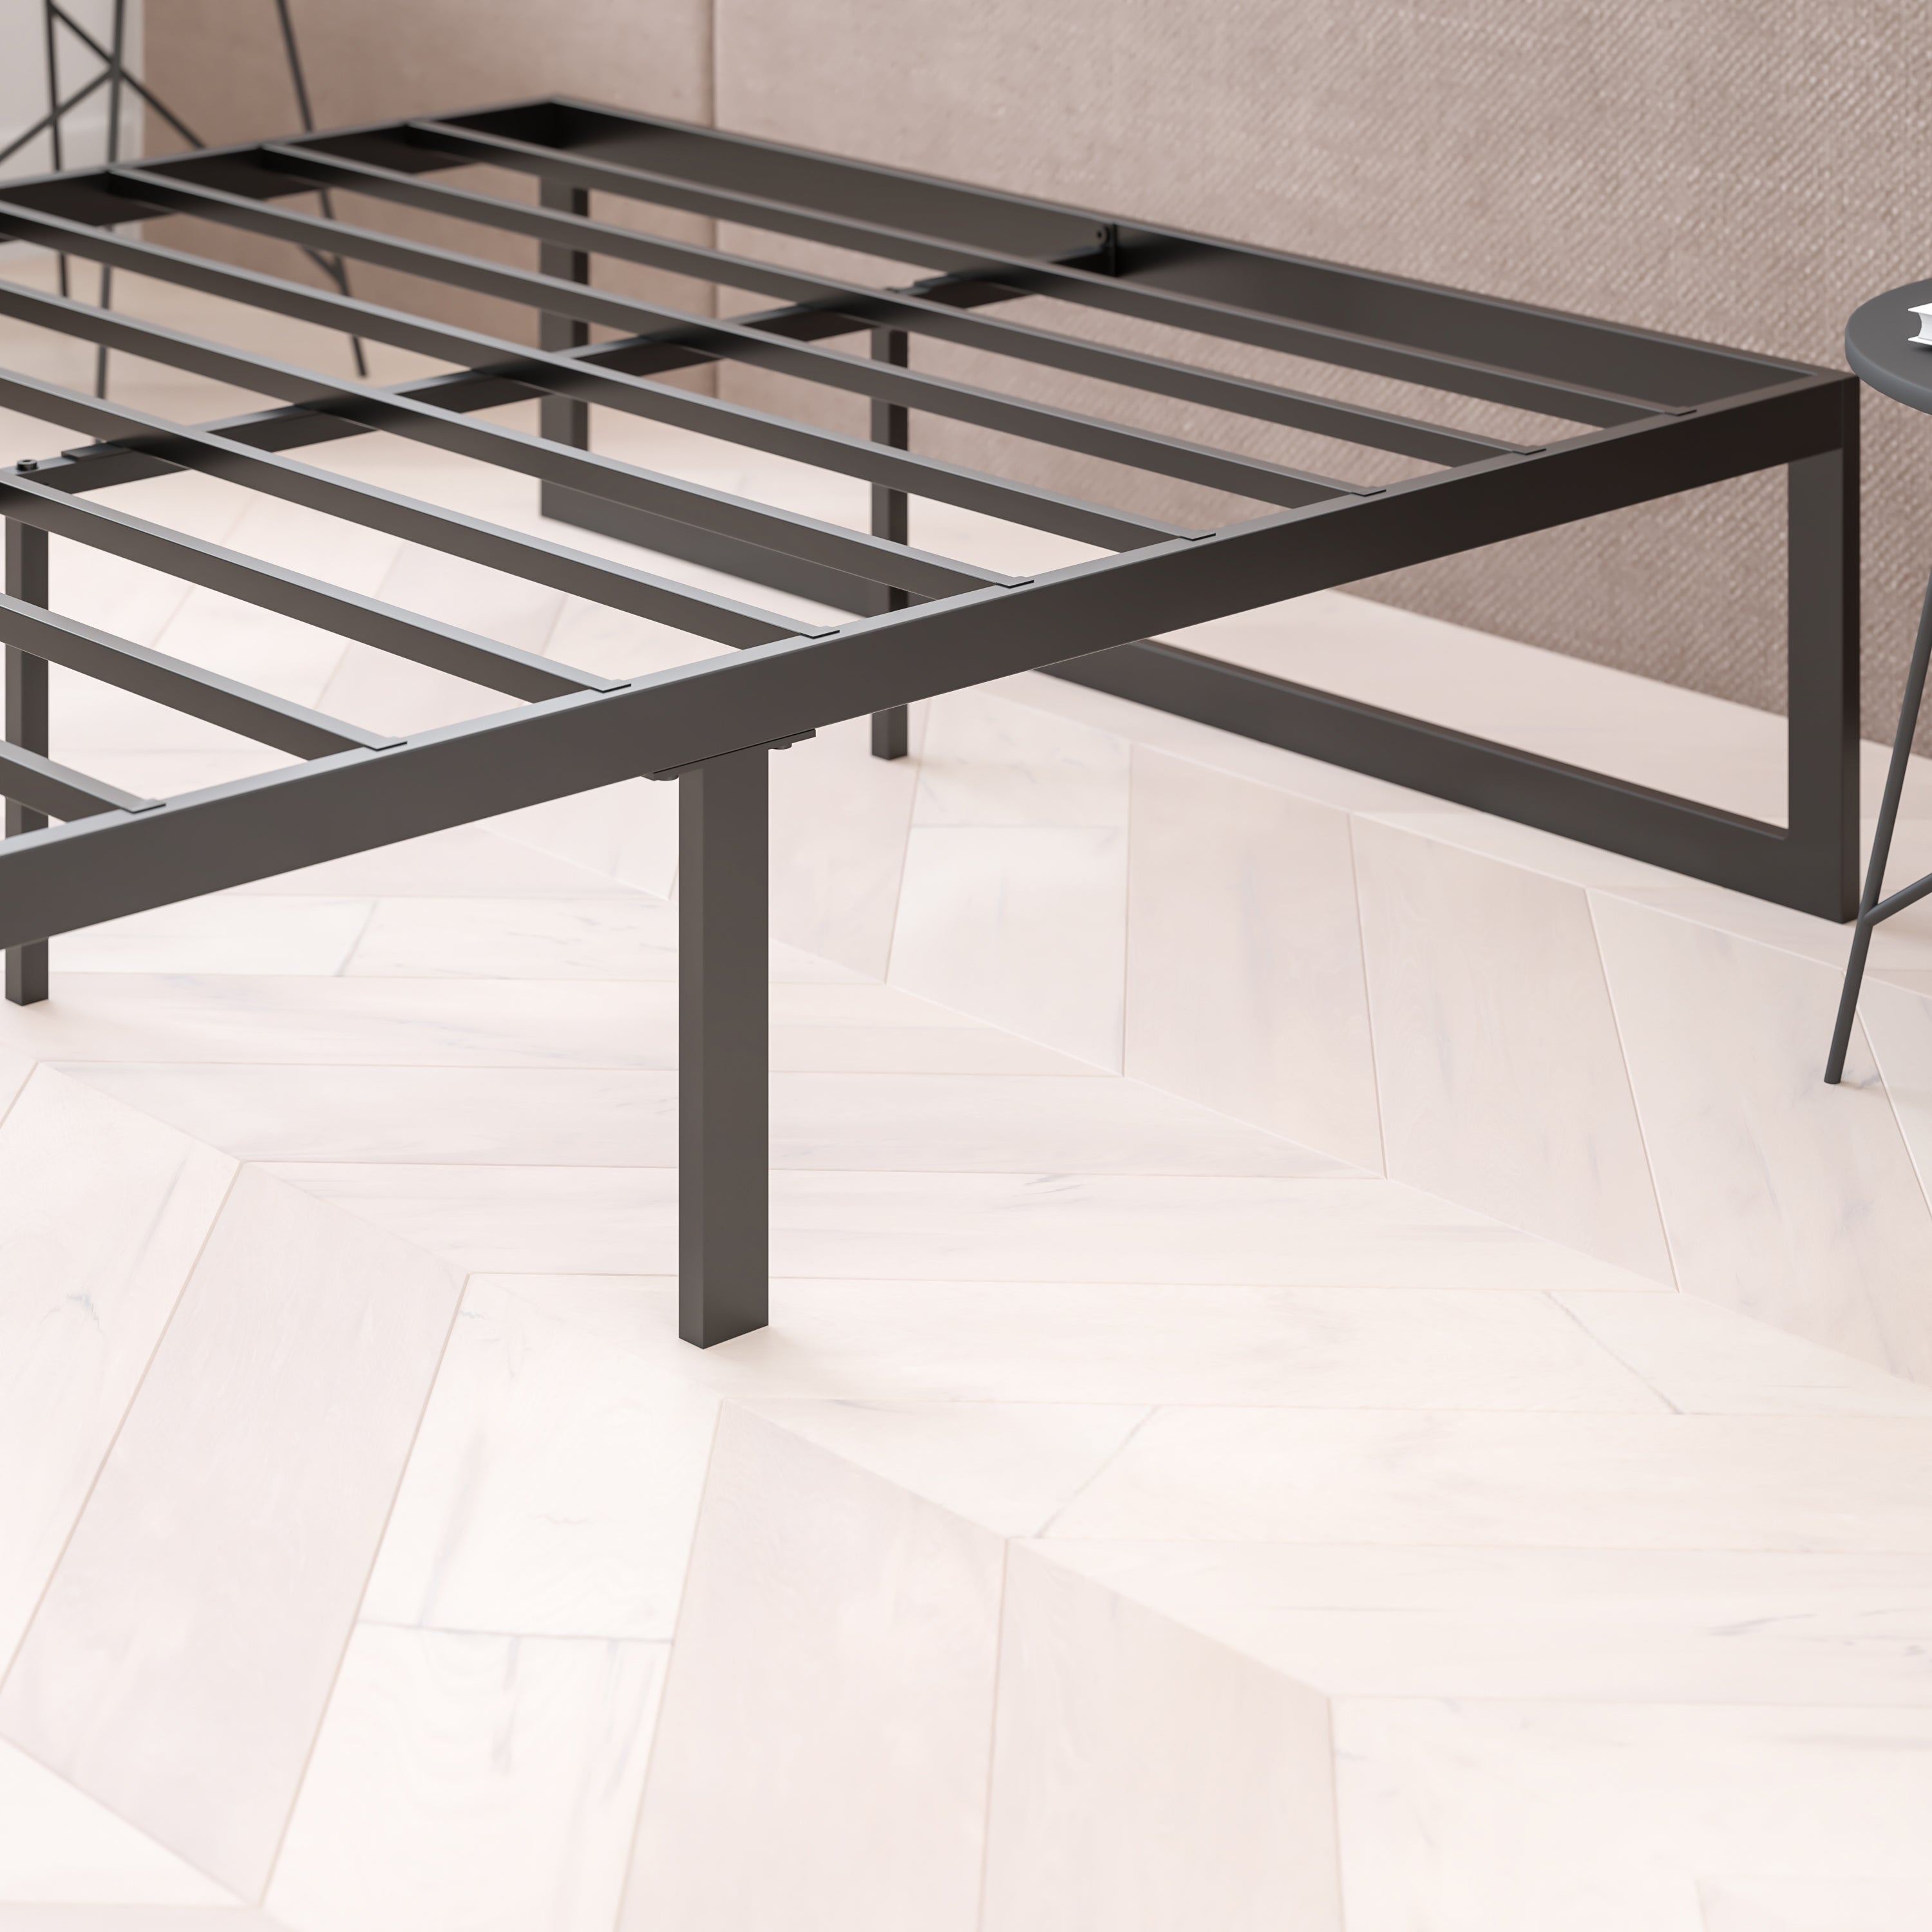 14 Inch Metal Platform Bed Frame - No Box Spring Needed with Steel Slat Support and Quick Lock Functionality-Bed Frame-Flash Furniture-Wall2Wall Furnishings